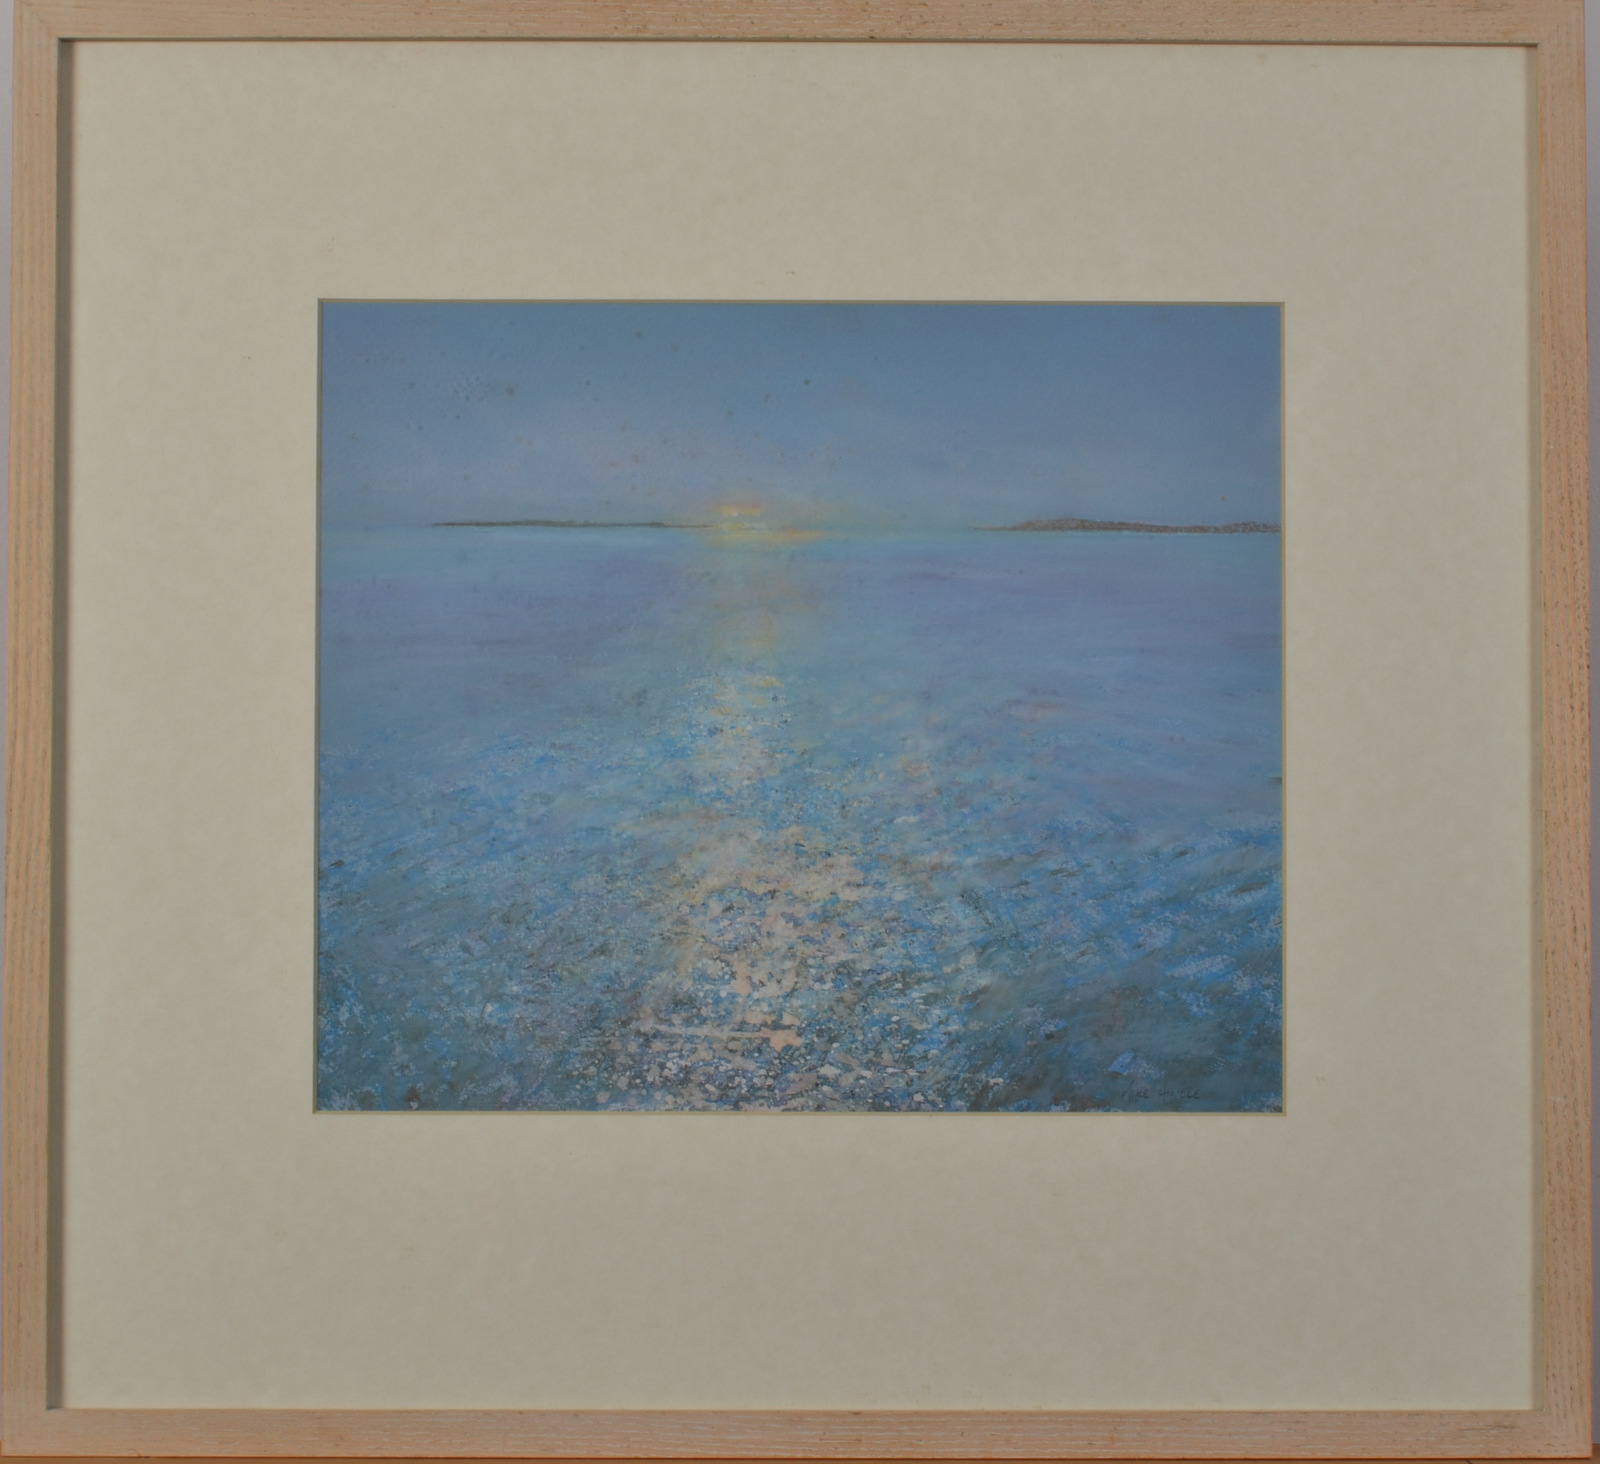 MIKE HINDLE Pale Blue Sea Mixed media Signed Titled and dated on the back 2000 27 x 32cm - Image 2 of 2